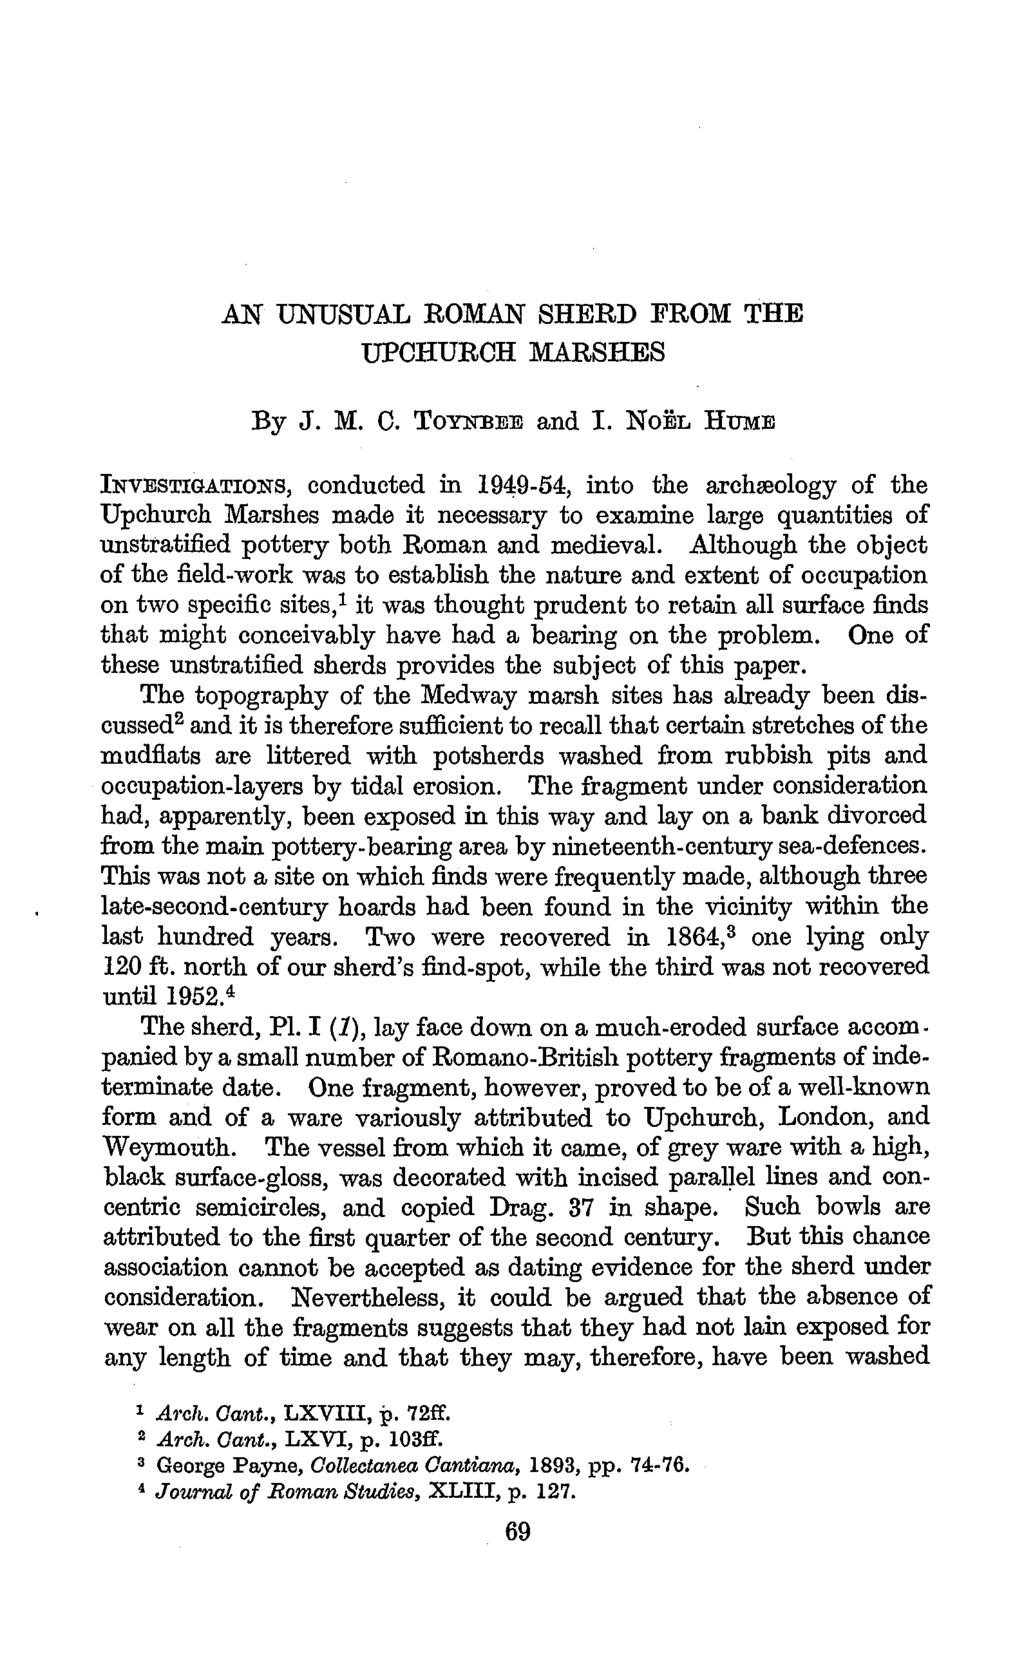 Archaeologia Cantiana Vol. 69 1955 AN UNUSUAL ROMAN SHERD FROM THE UPCHURCH MARSHES By J. M. 0. TOYNBEE and I.